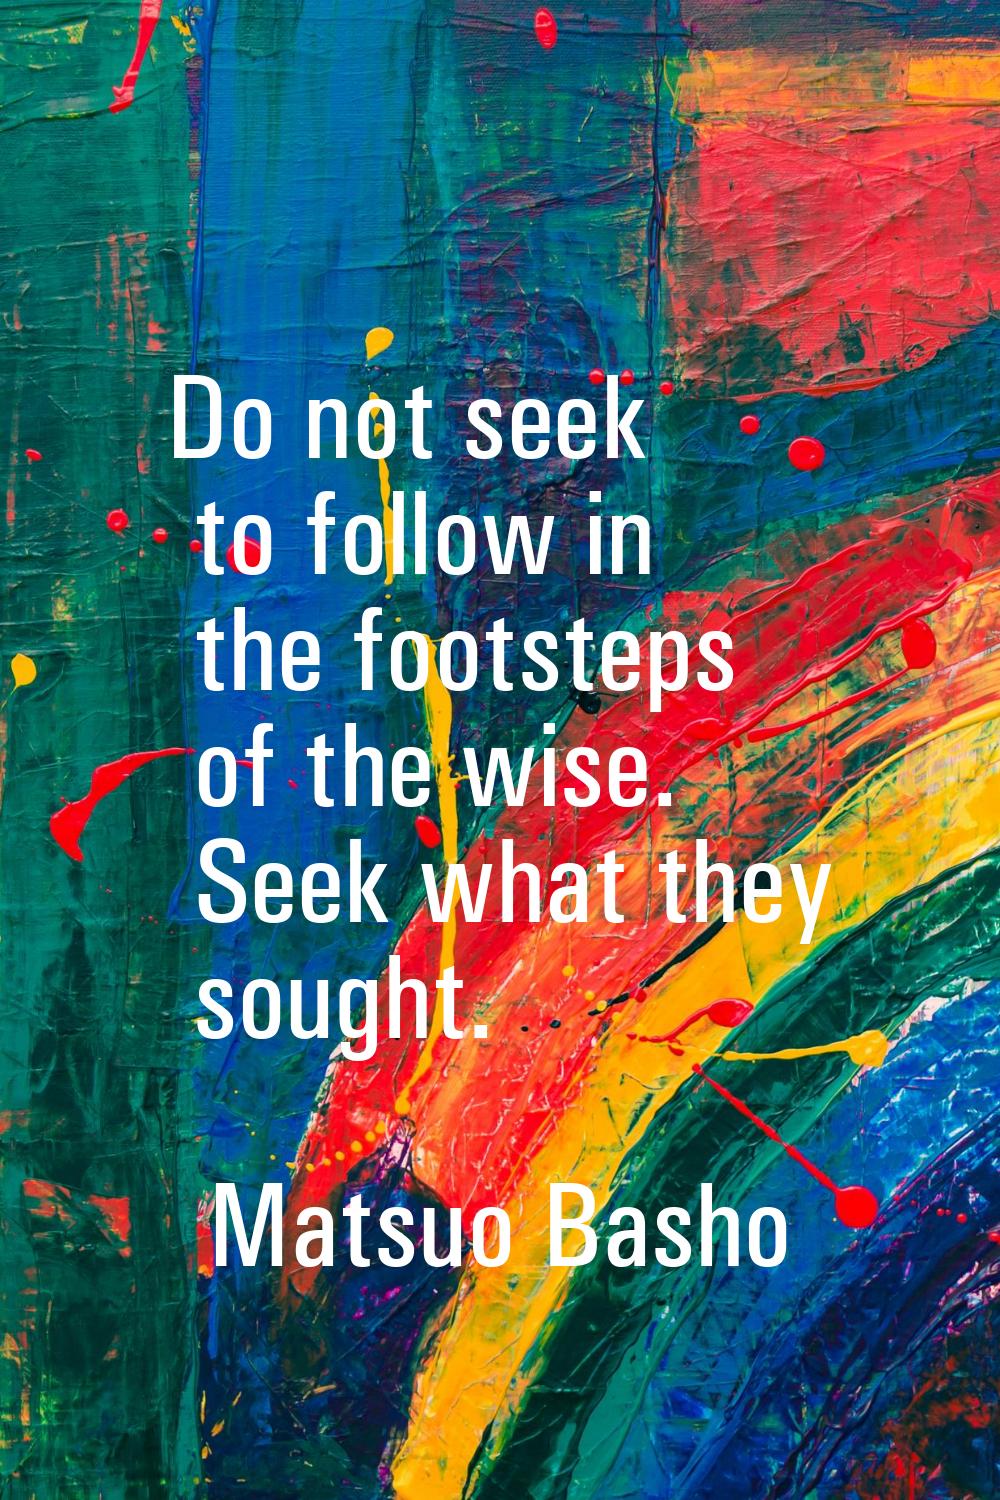 Do not seek to follow in the footsteps of the wise. Seek what they sought.